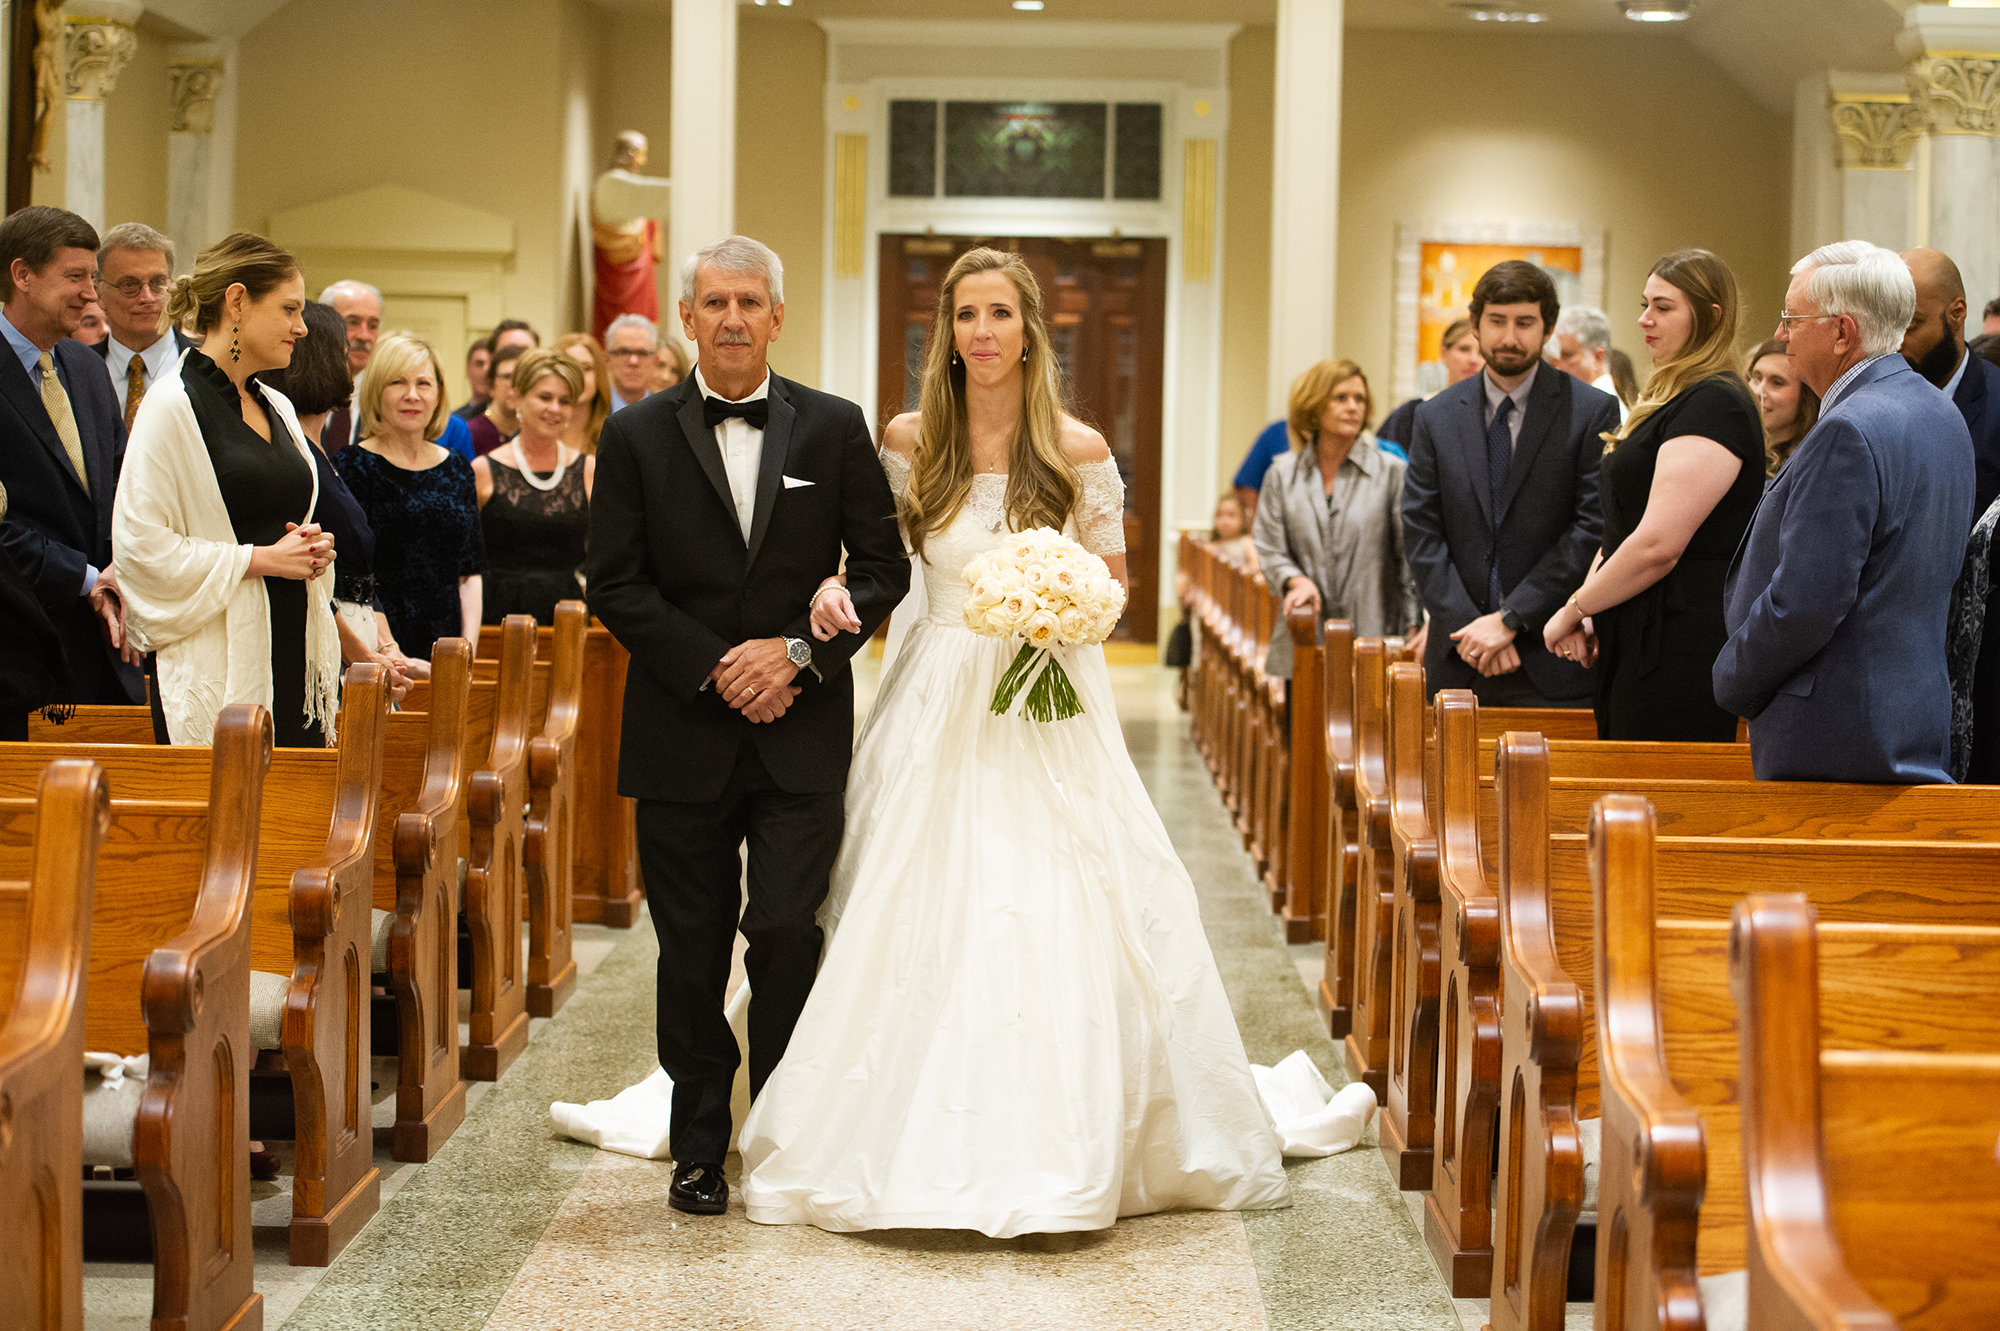 Bride walking down aisle with dad